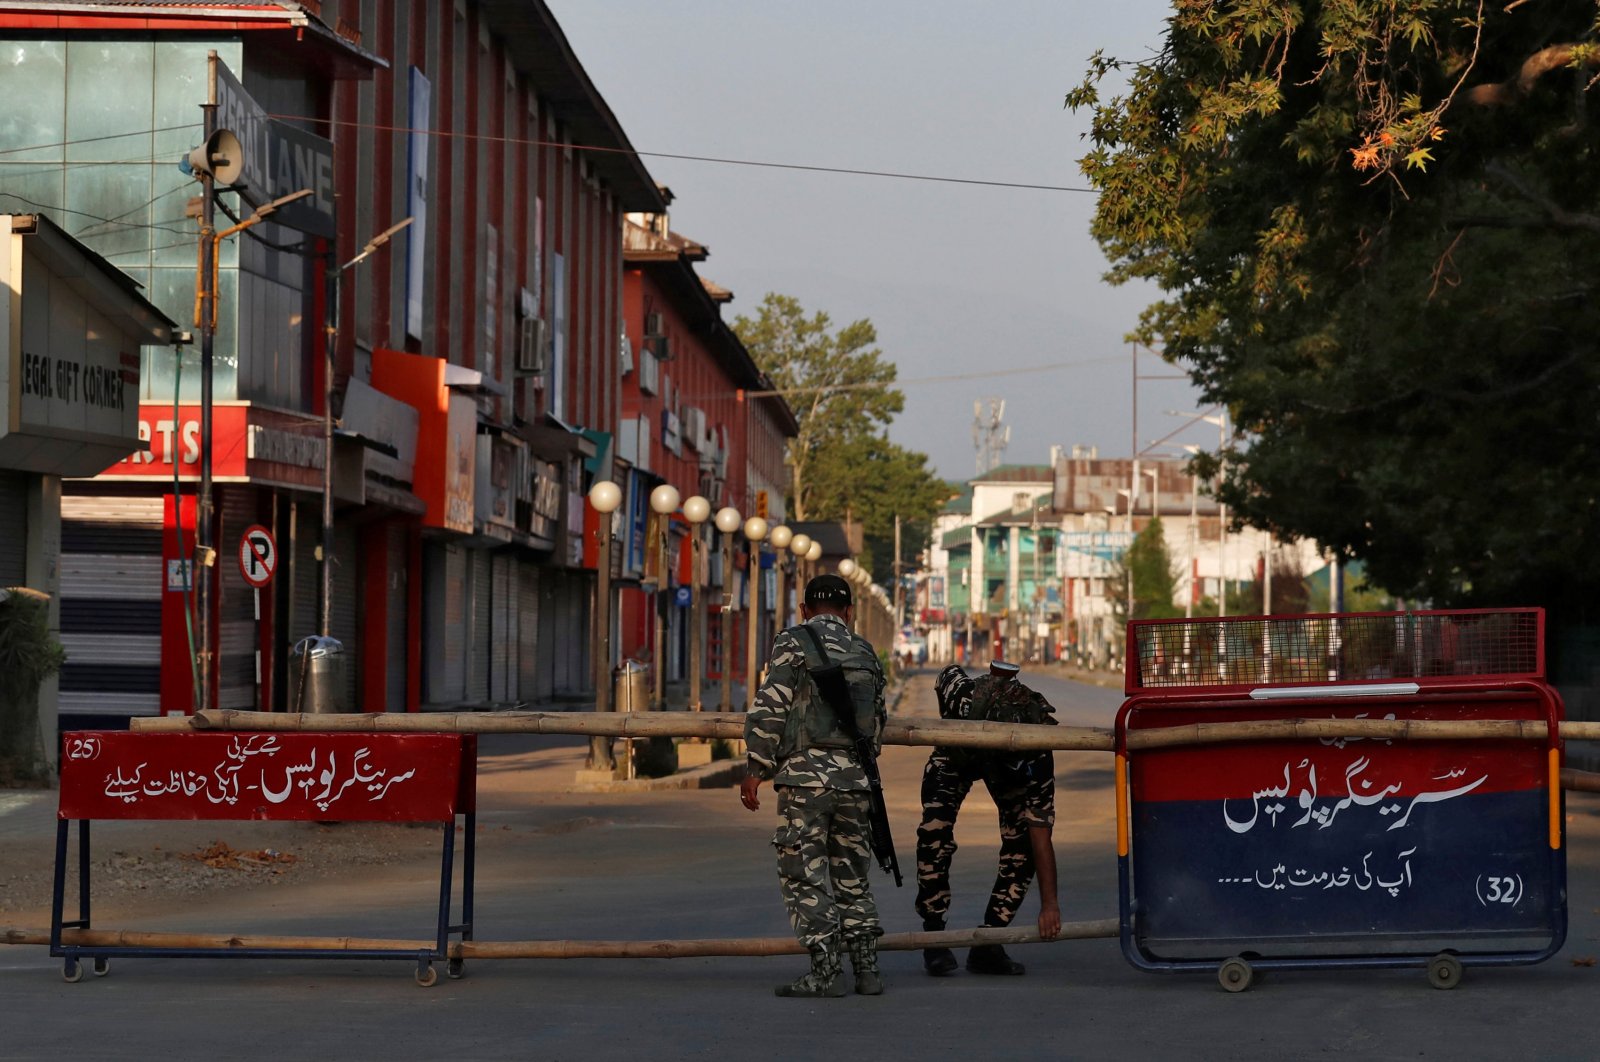 Indian officers put up a roadblock on an empty street during a lockdown on the first anniversary of the revocation of Kashmir's autonomy, in Srinagar, Aug. 5, 2020. (Reuters Photo)